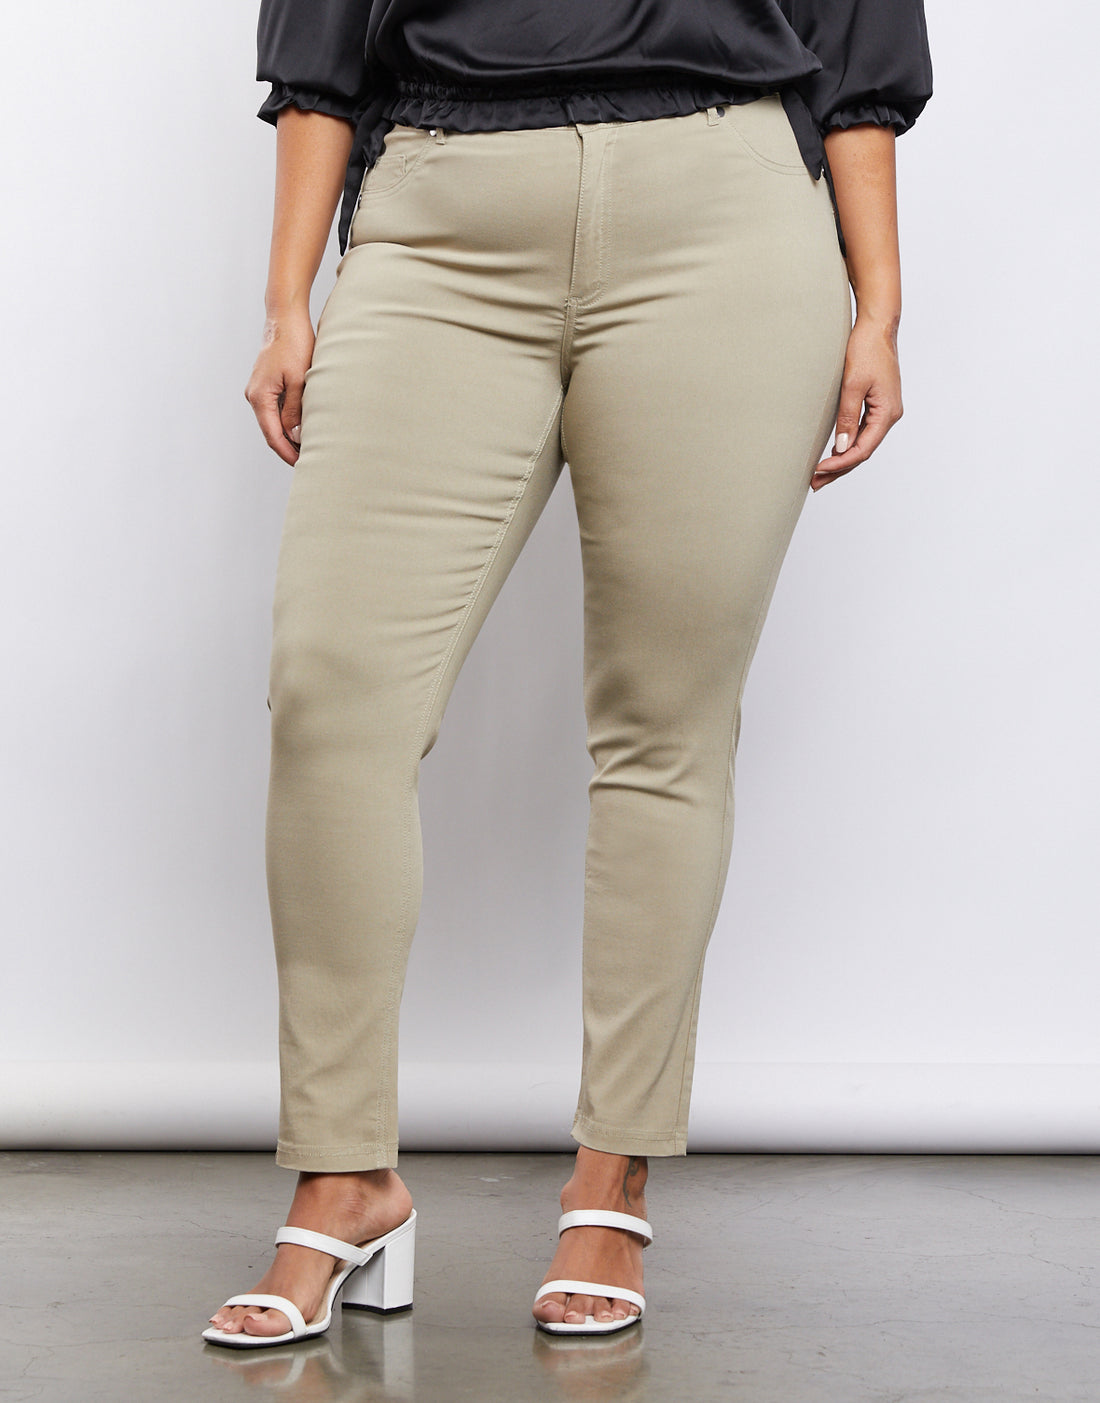 Curve Everyday Jeggings Plus Size Bottoms -2020AVE